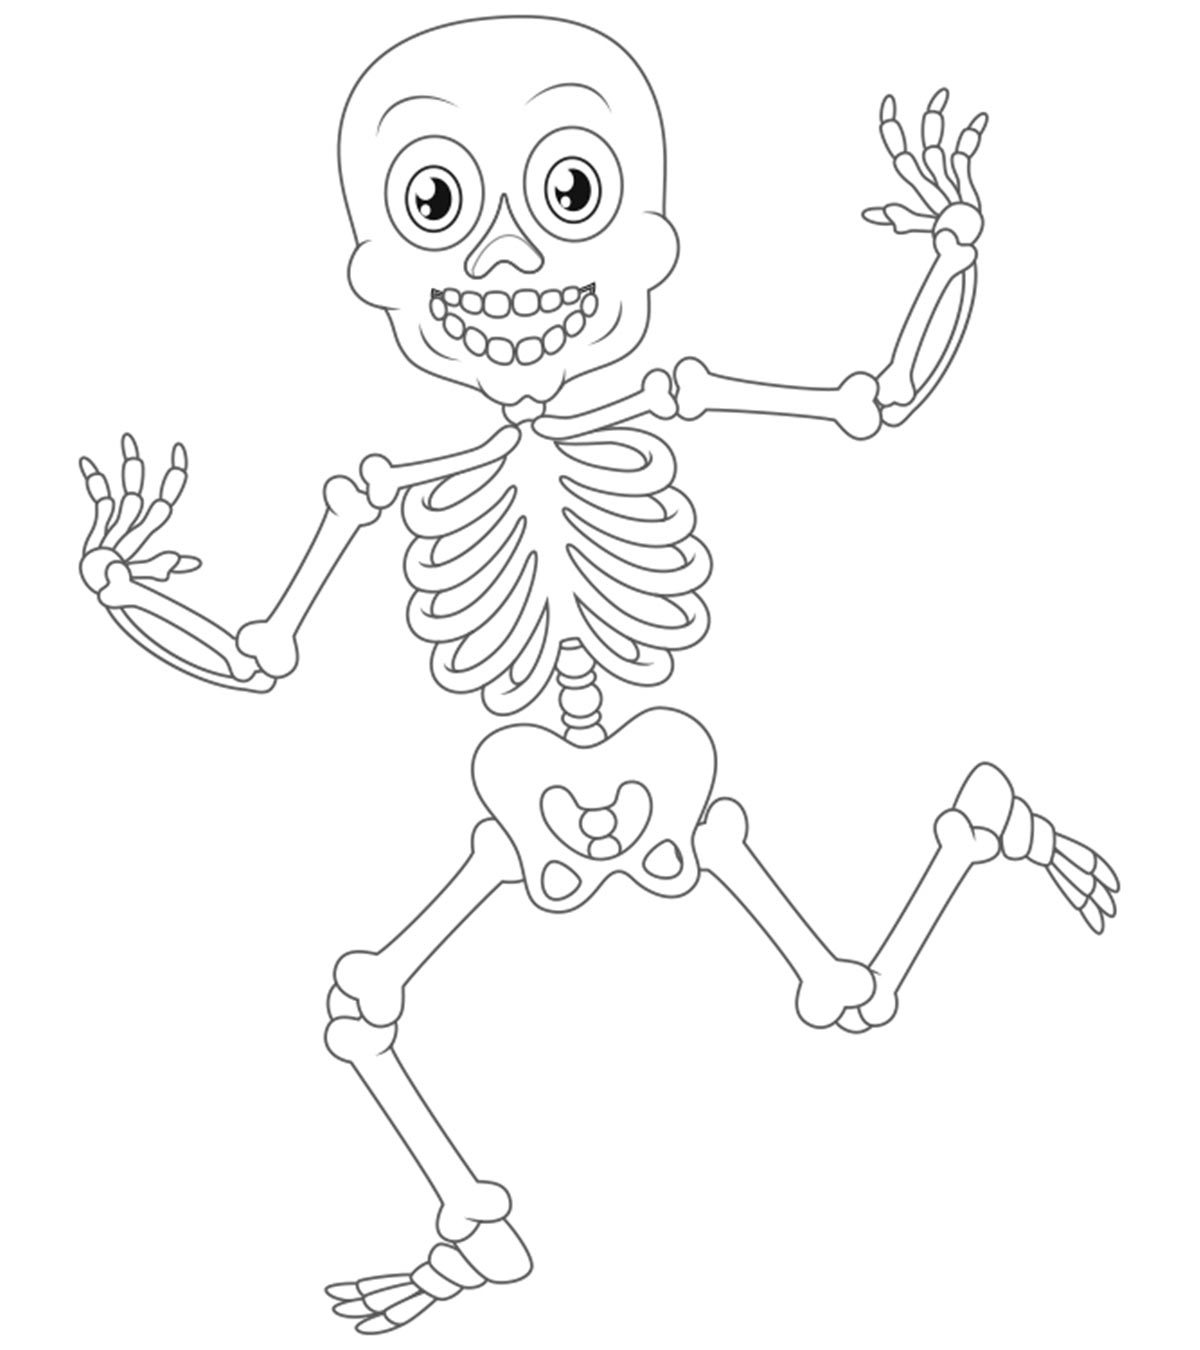 15 Best Skeleton Coloring Pages For Your Toddler_image